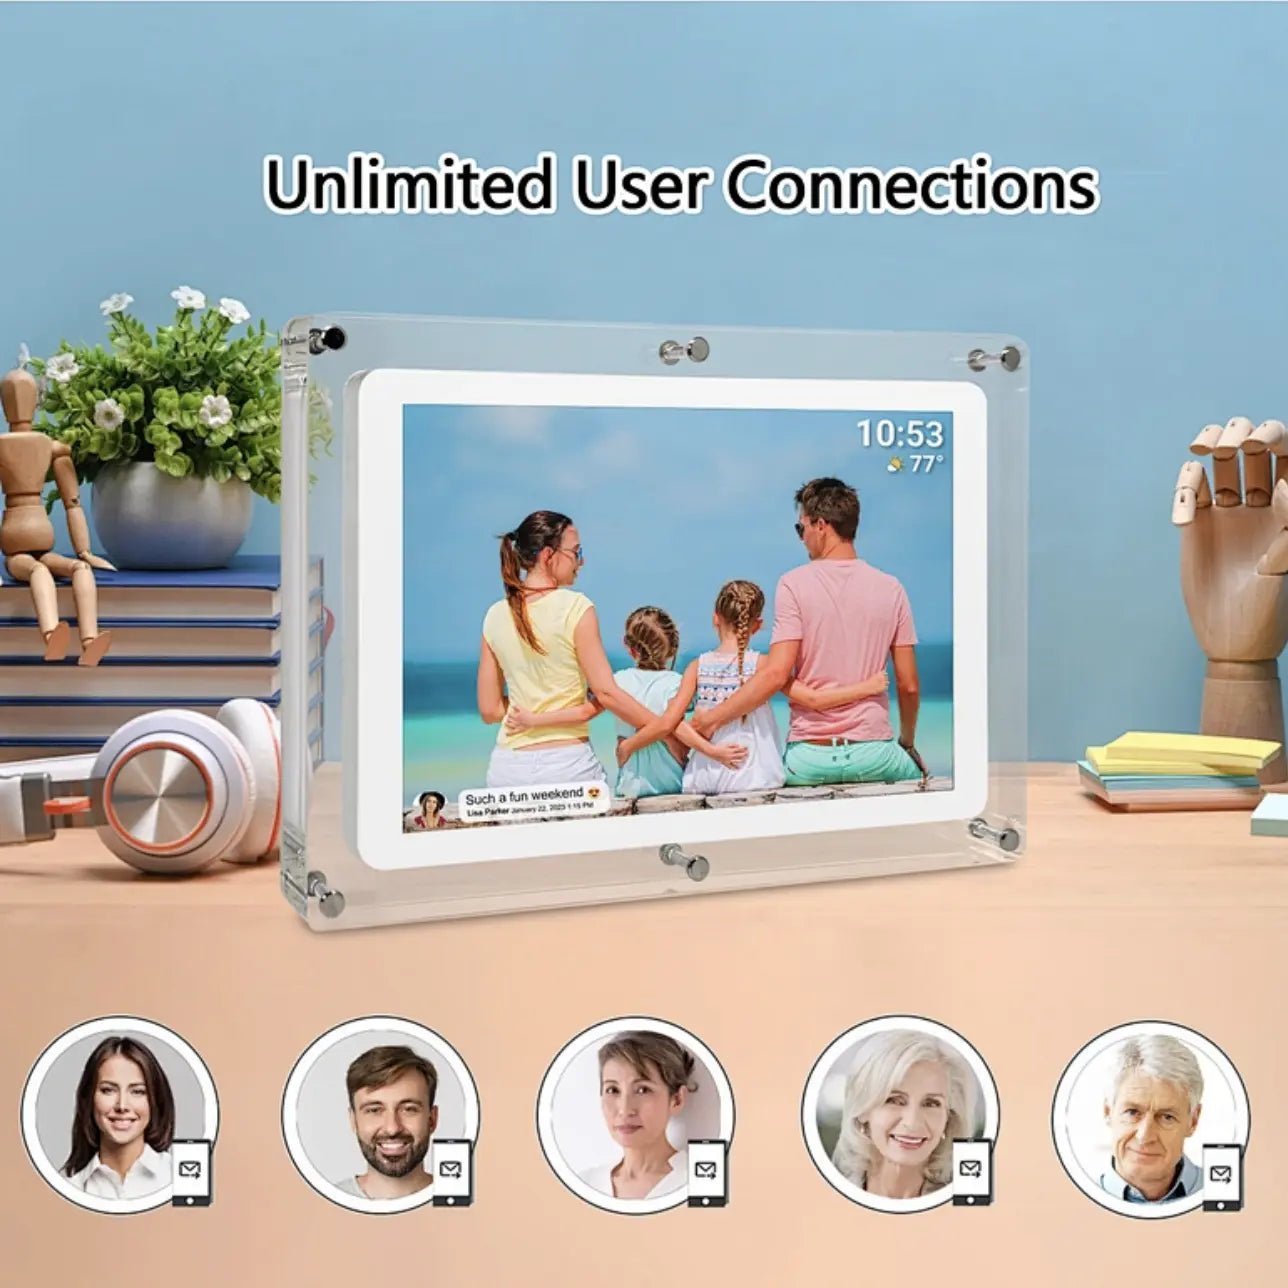 UK Technology Acrylic Digital Photo Frame with a family in a beach setting with 5 icons of people showing connectivity